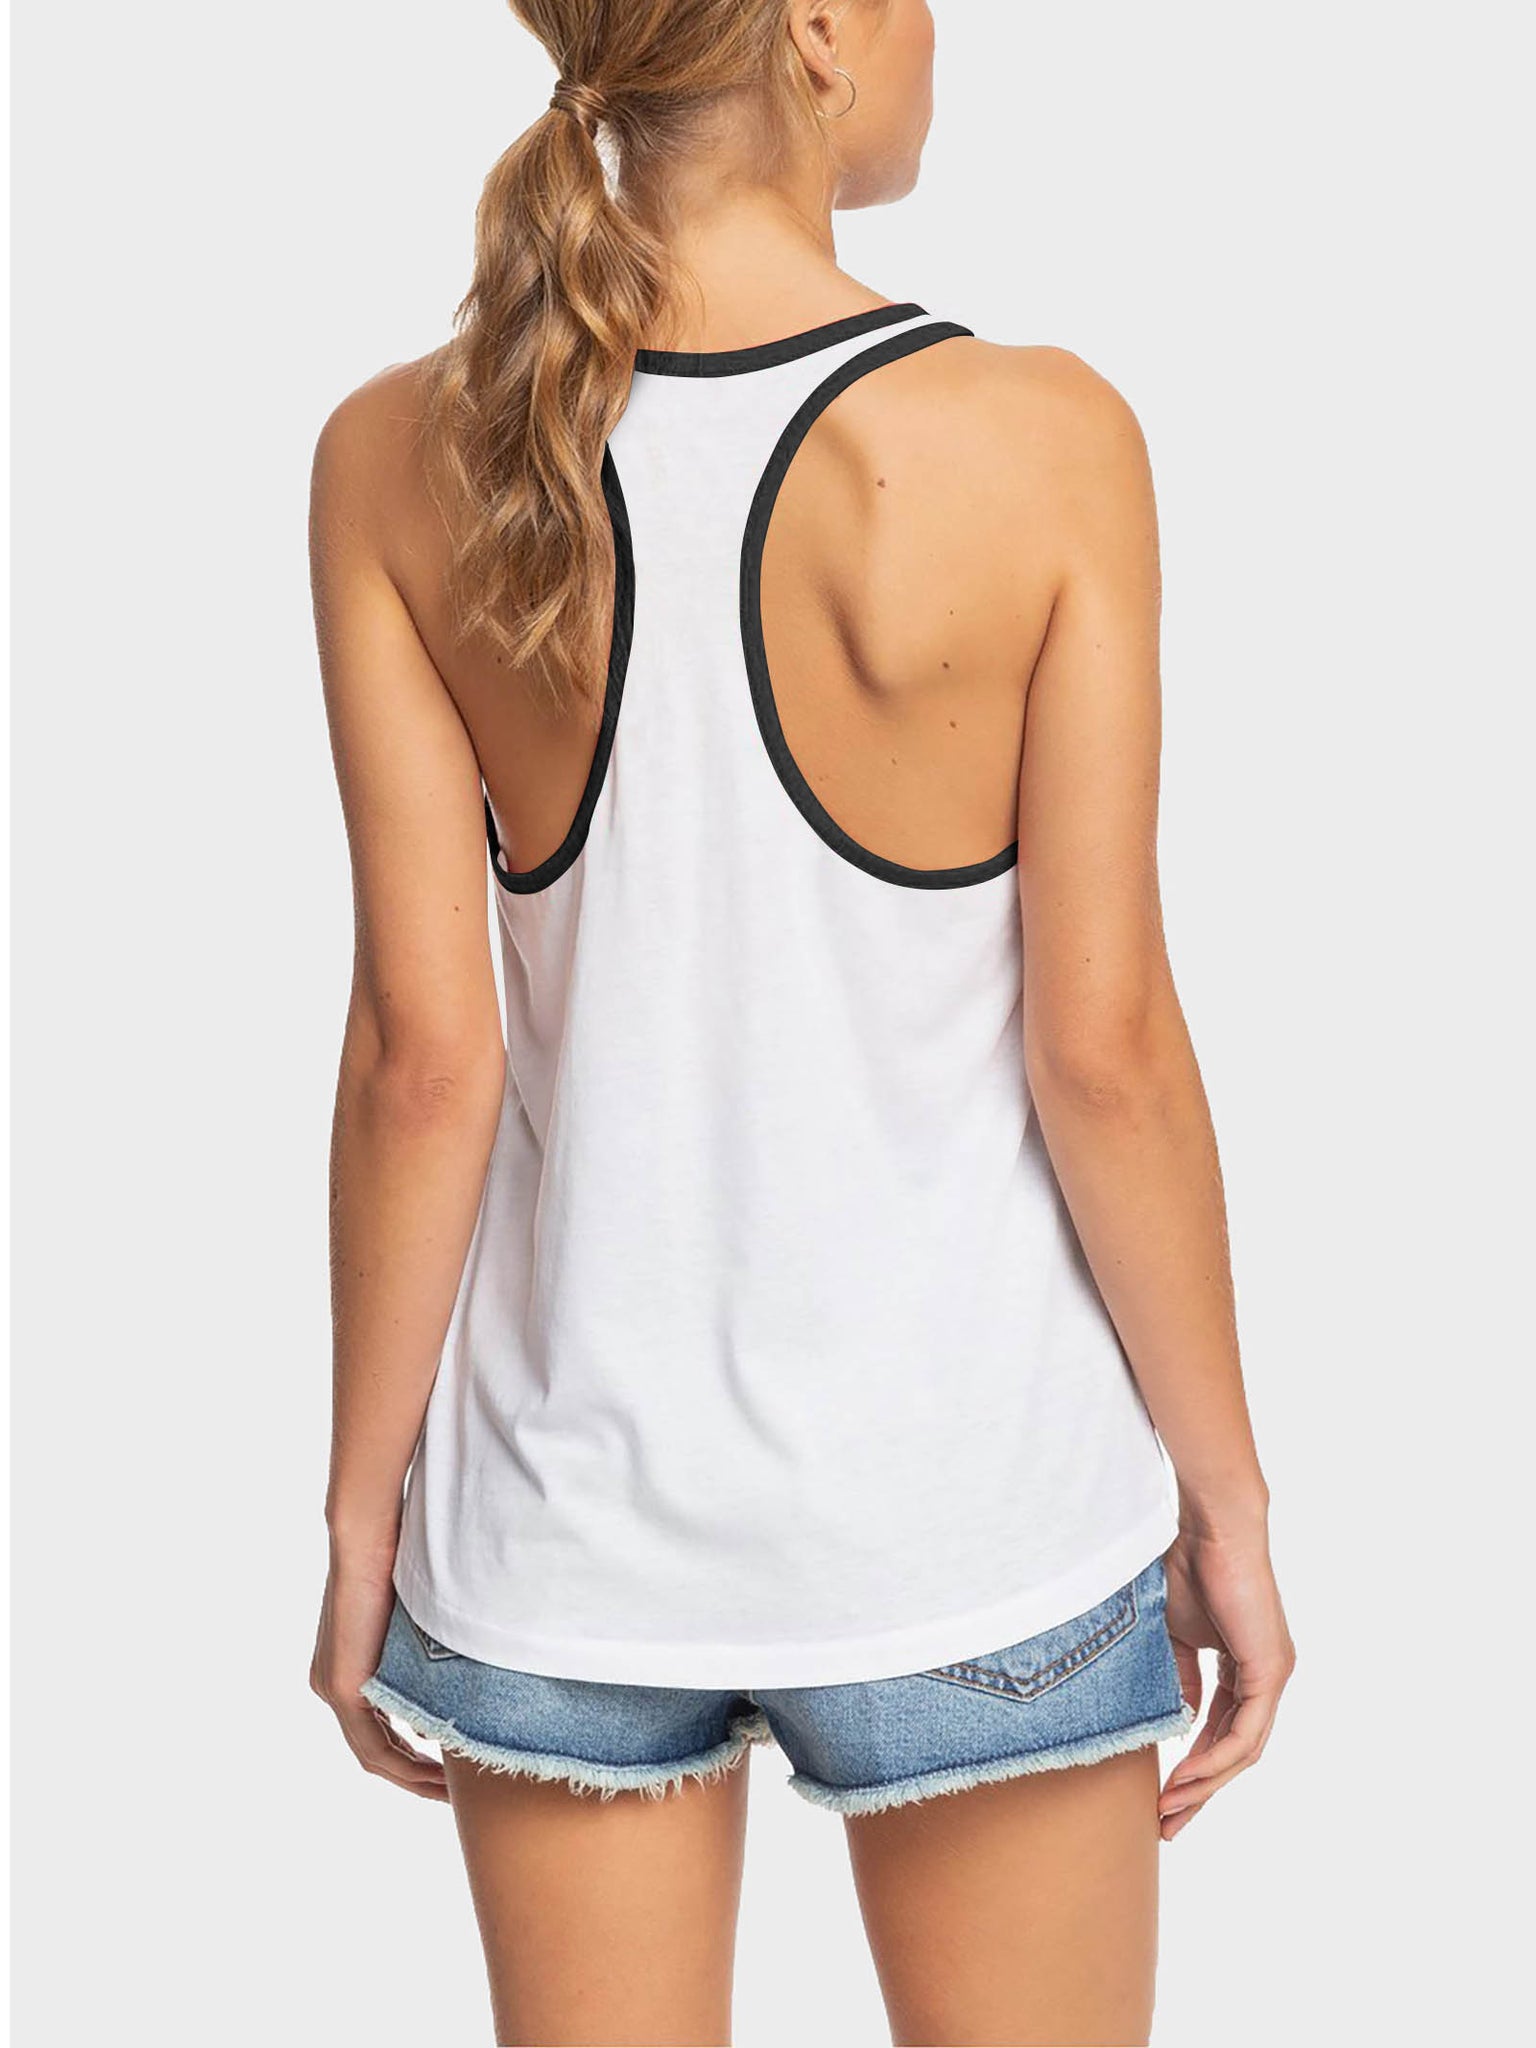 Women's Relaxed-Fit TriBlend Moisture-Wicking Yoga Tank Top, Small White